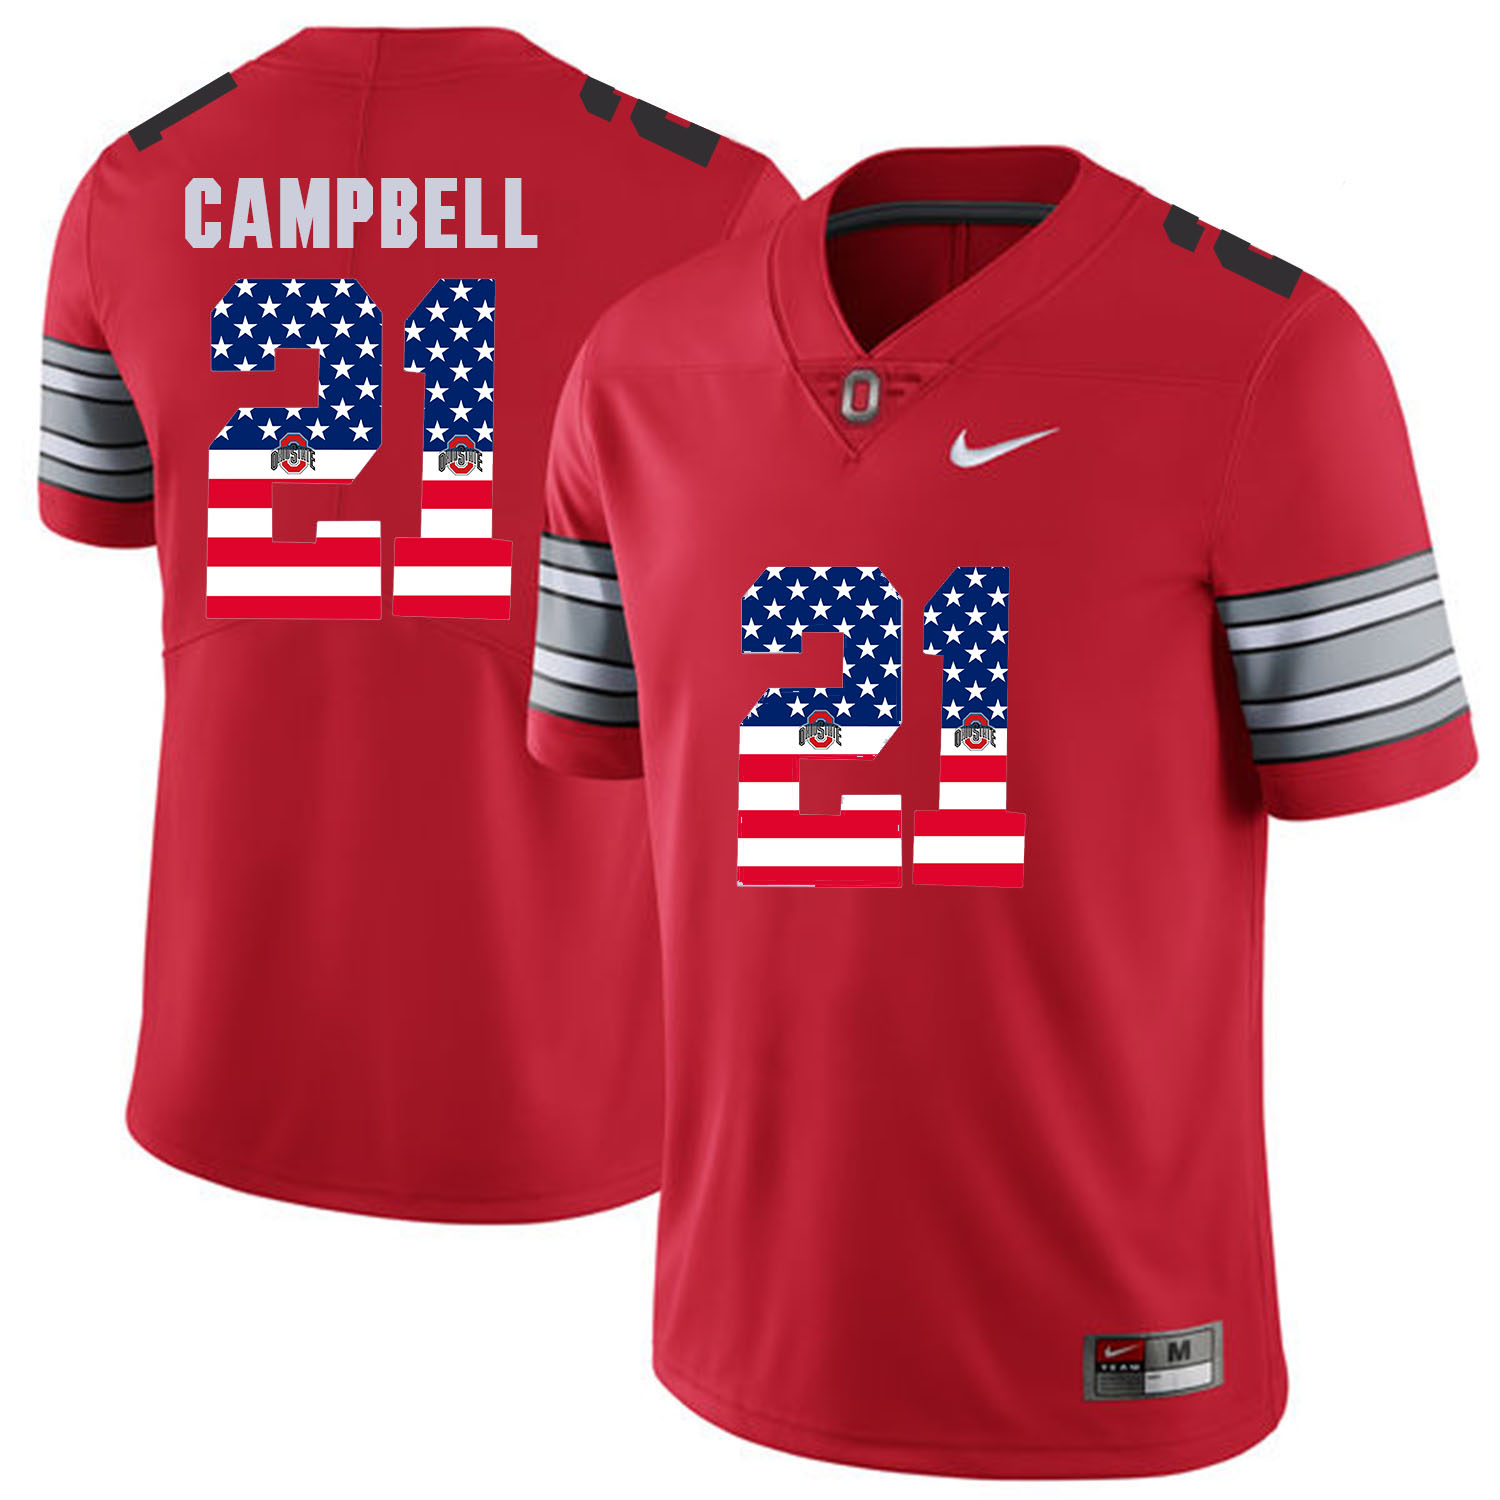 Men Ohio State 21 Gampbell Red Flag Customized NCAA Jerseys